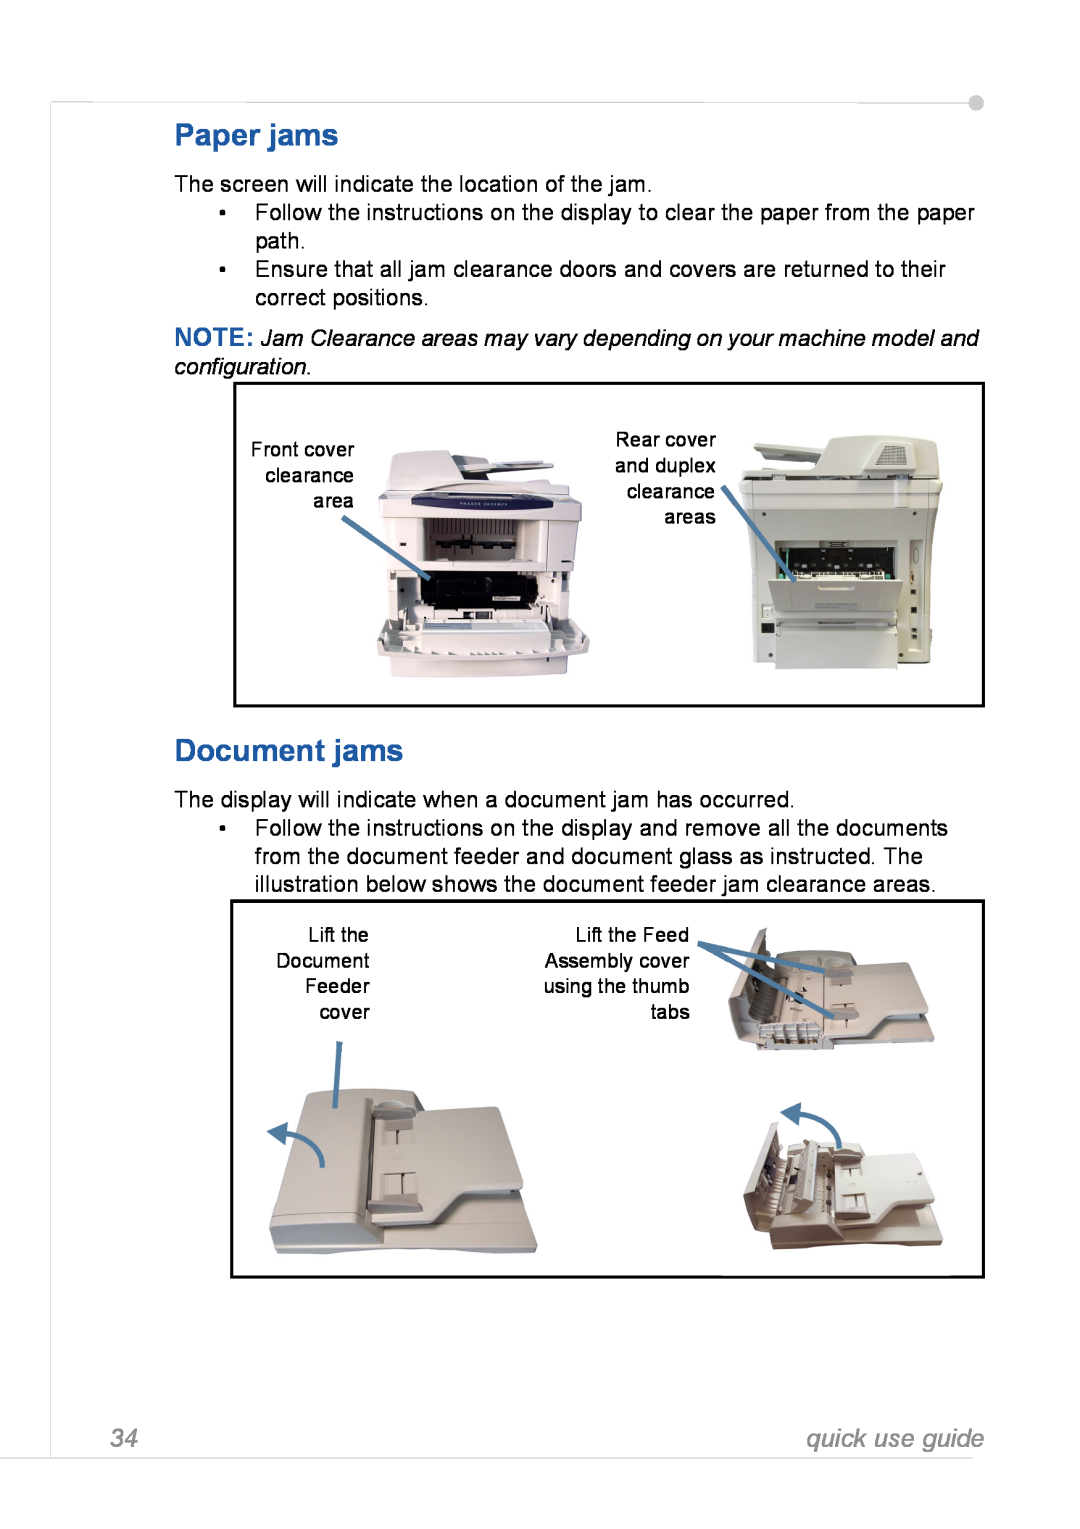 Xerox 3635MFP manual Paper jams, Document jams, quick use guide 